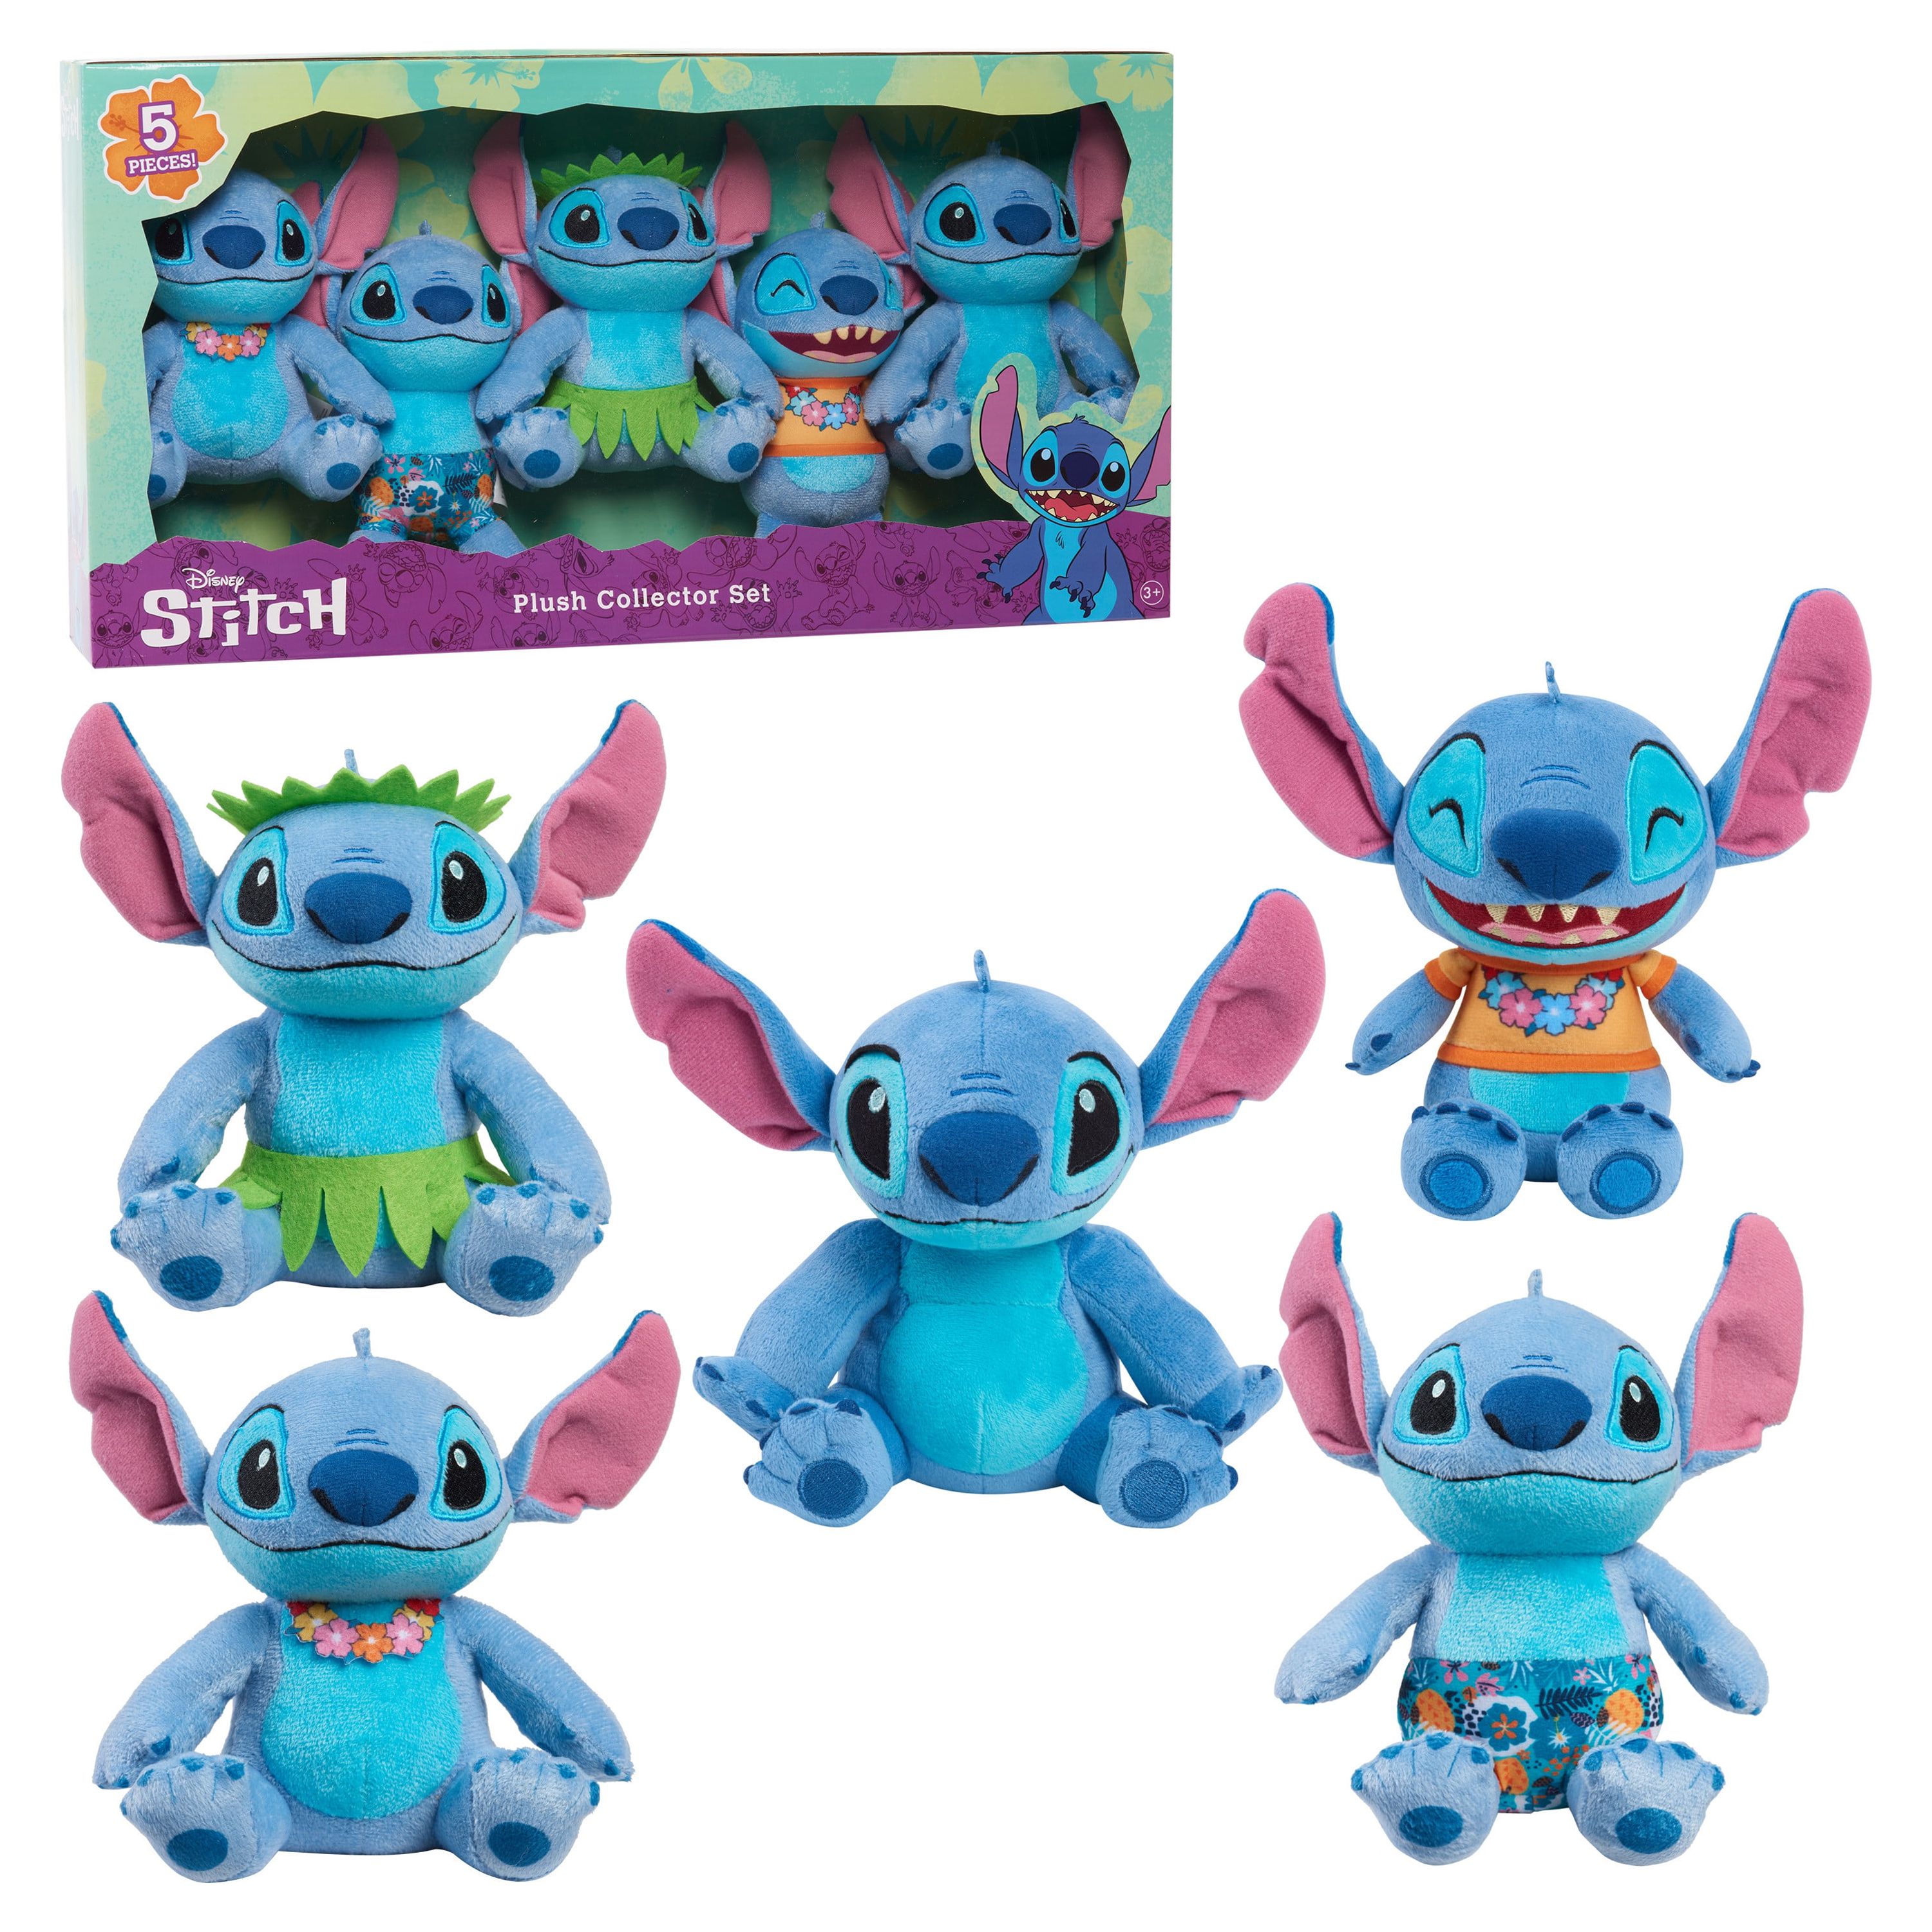 Disney Stitch Plush Collector Set, Officially Licensed Kids Toys for Ages 3 Up, Gifts and Presents - image 1 of 4